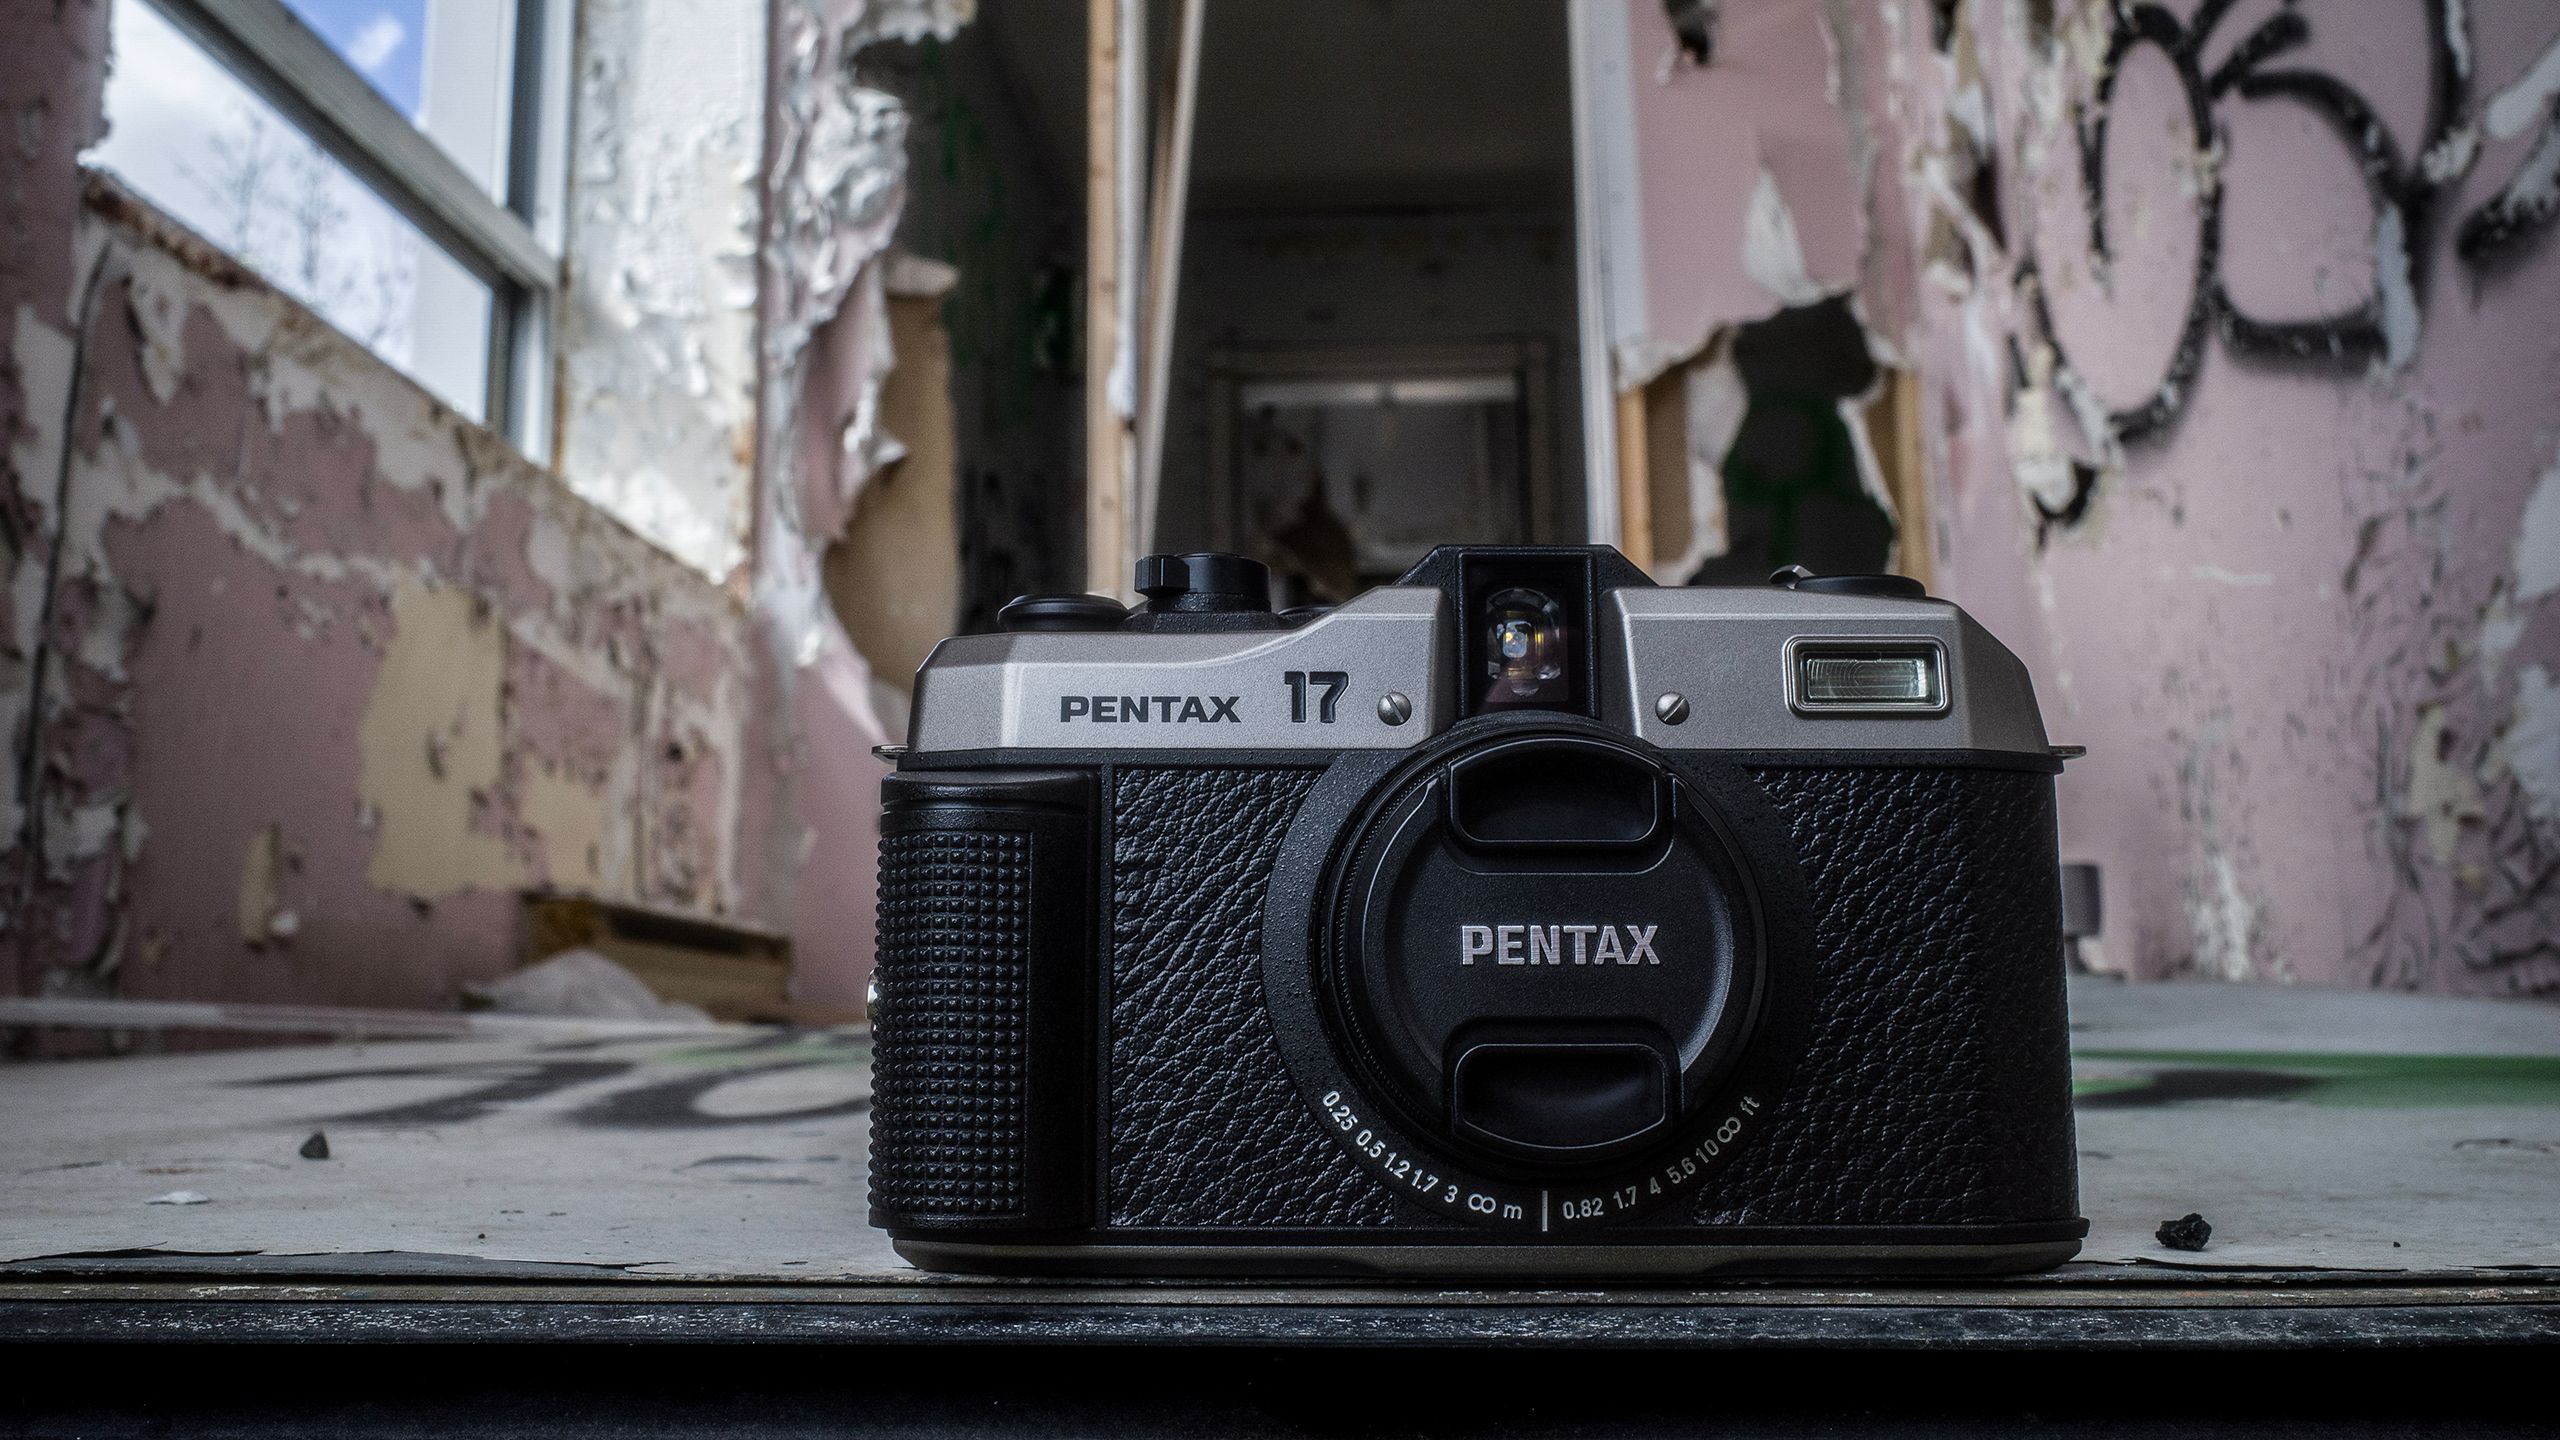 An image of the Pentax 17 film camera front